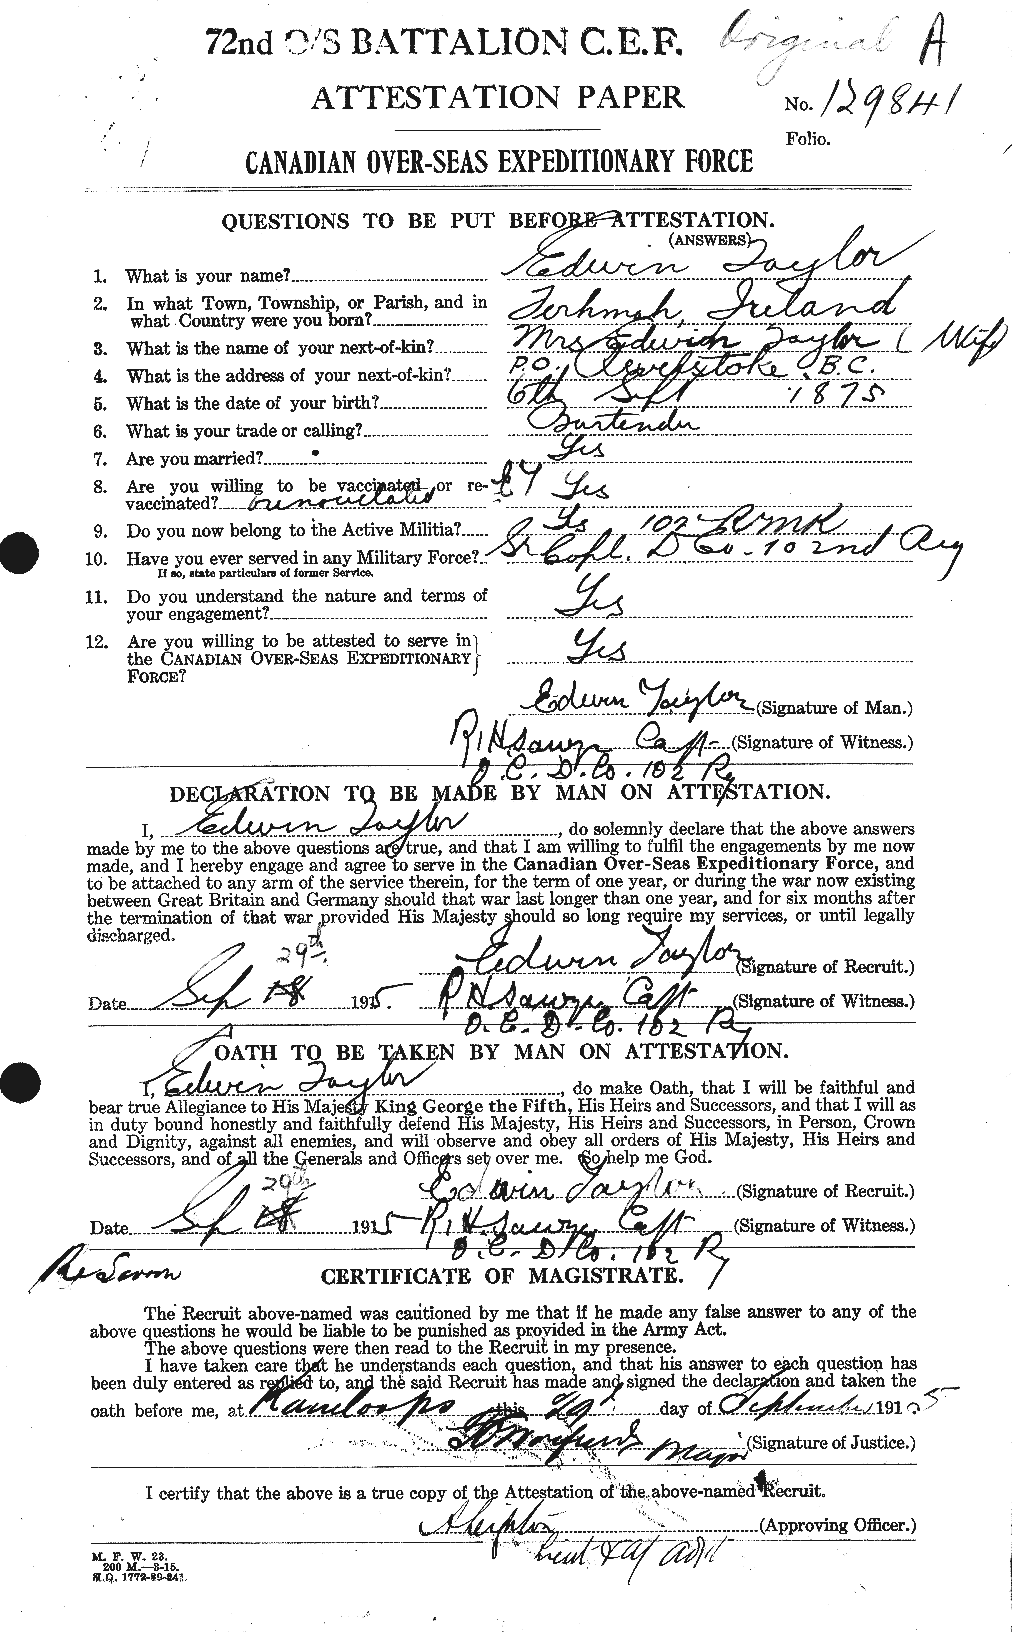 Personnel Records of the First World War - CEF 627332a